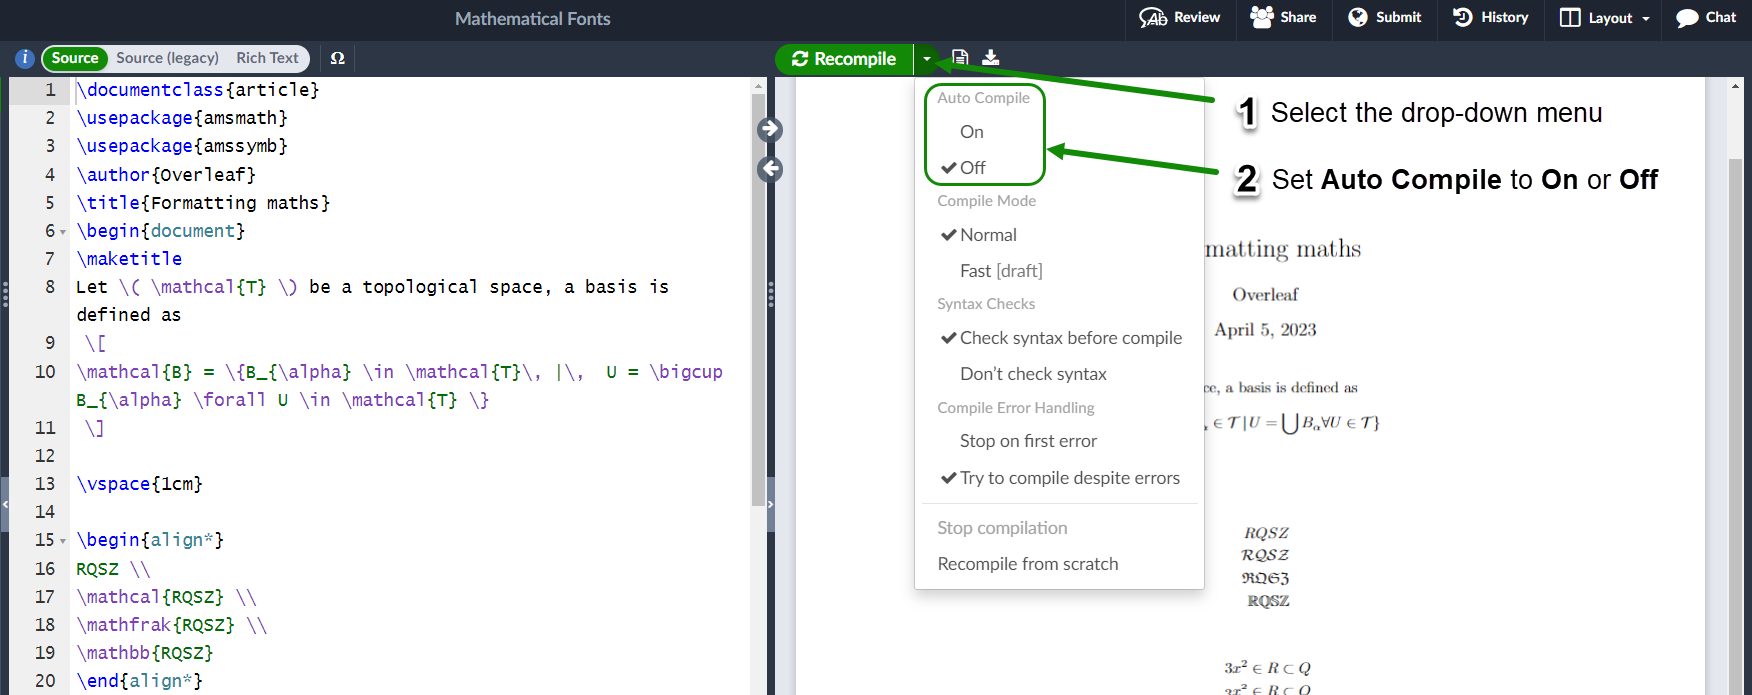 Setting the auto compile mode in Overleaf